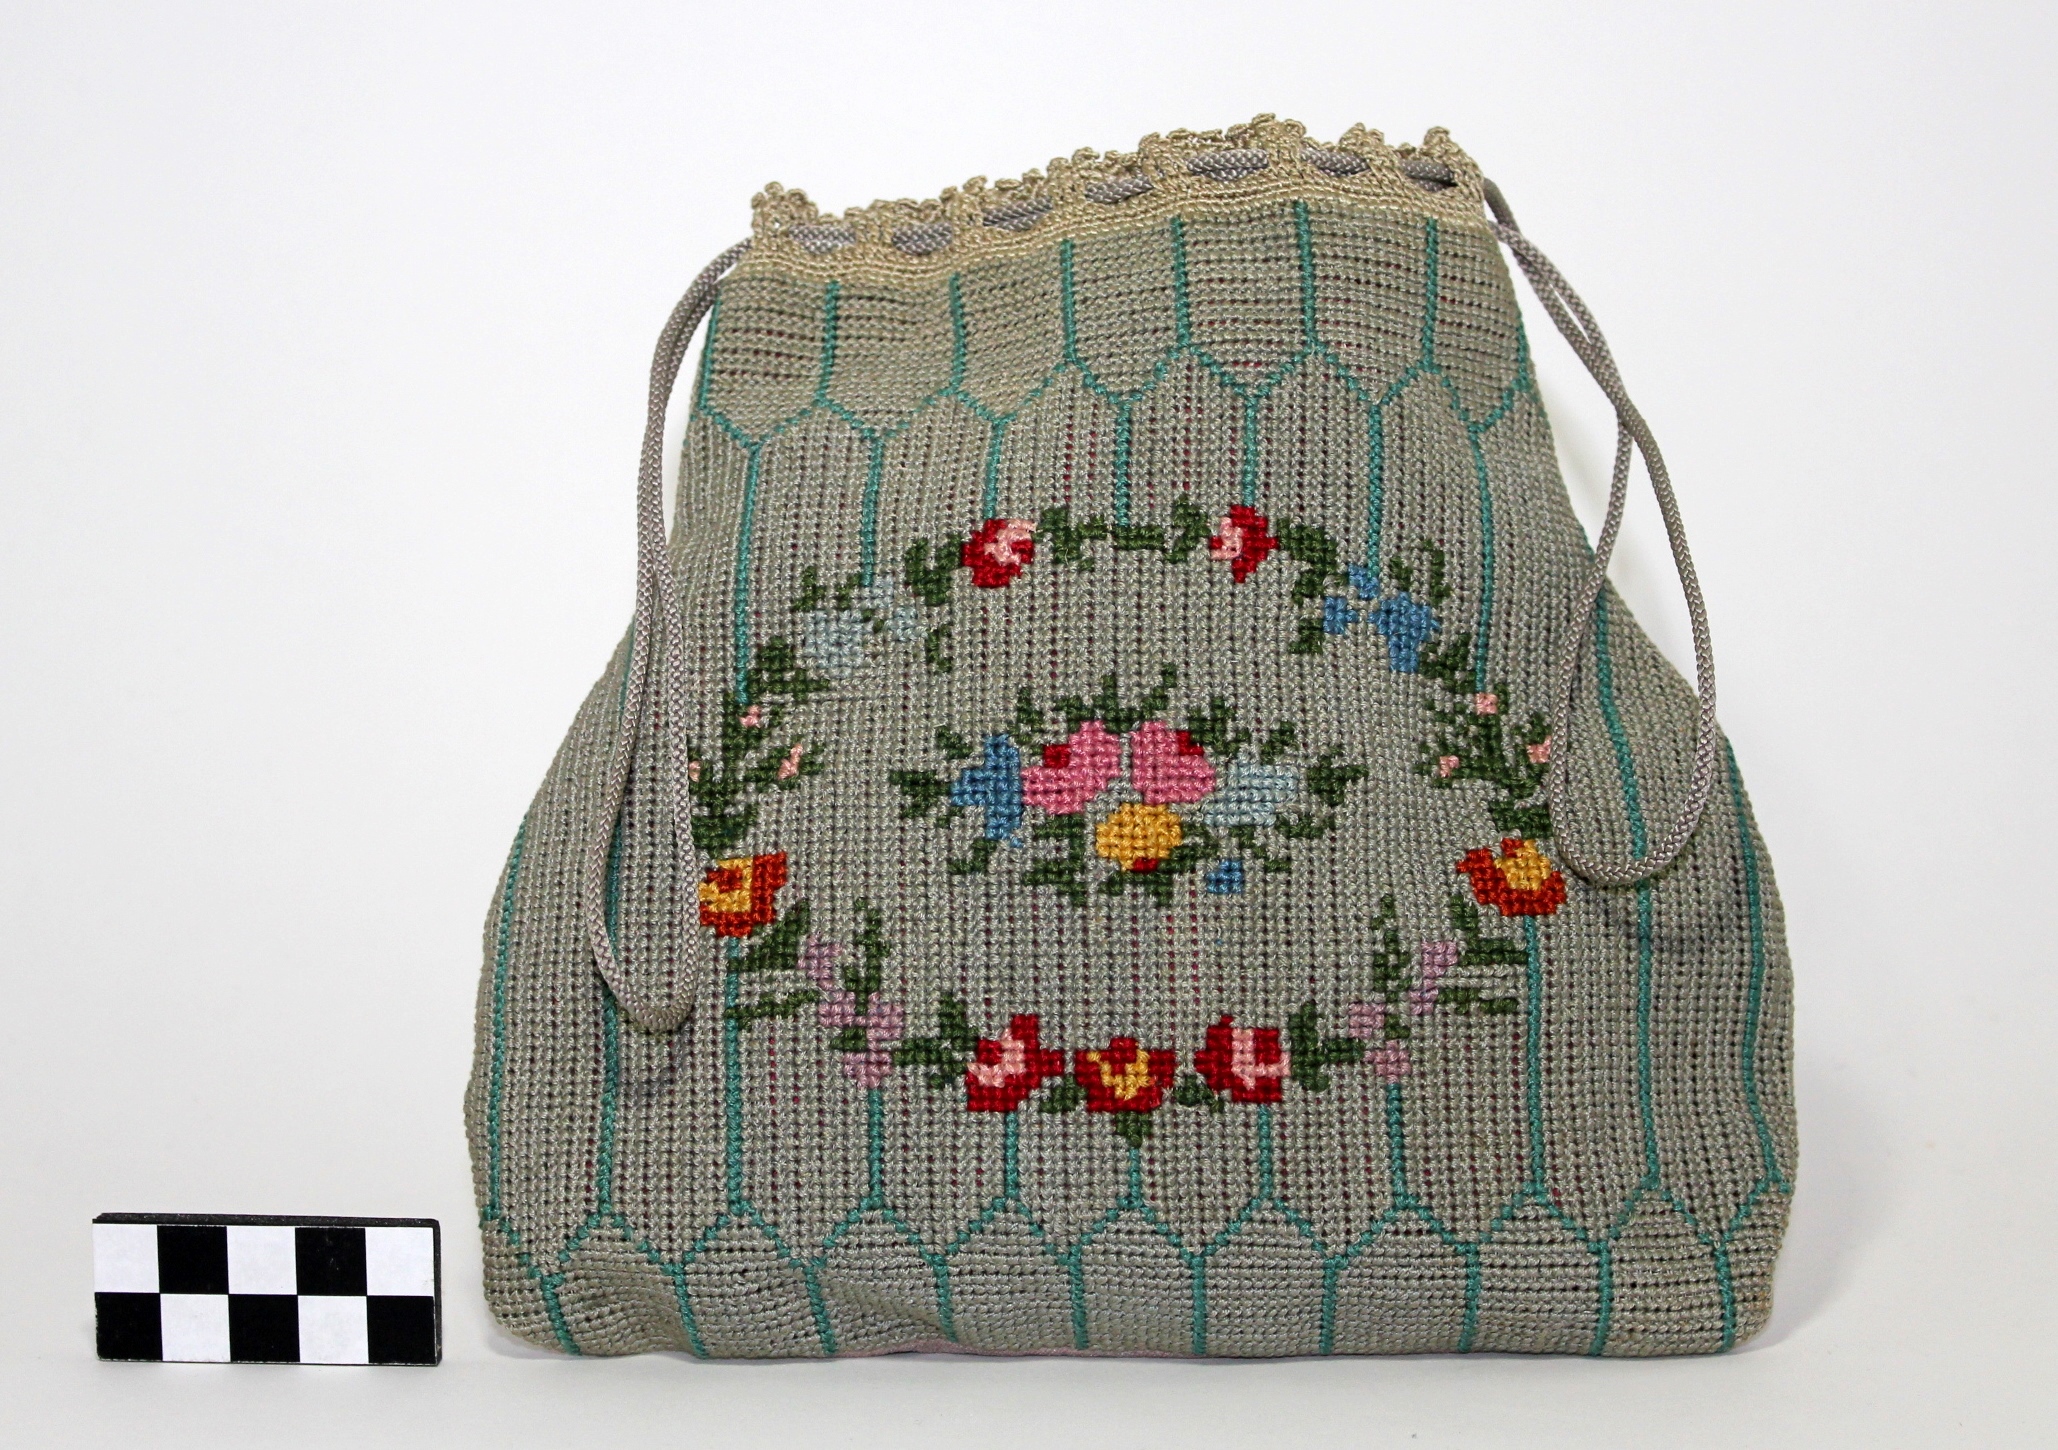 Blue needlework Victorian purse with flower in the middle